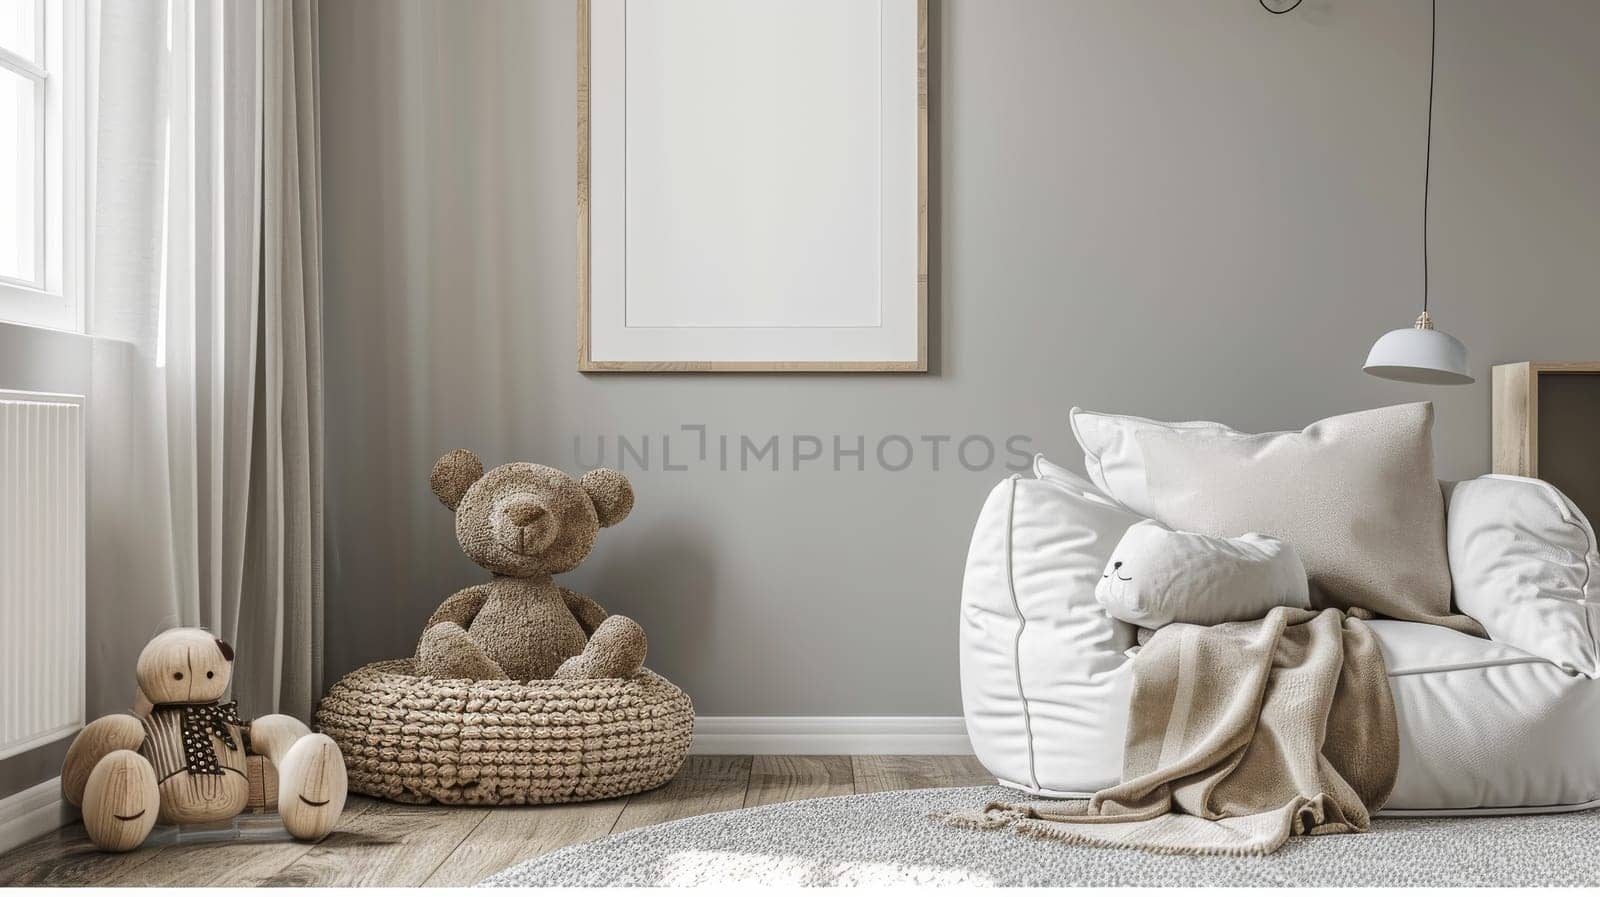 A living room with a white couch and a teddy bear on a rug. The room is clean and well-organized, with a white wall and a white chair